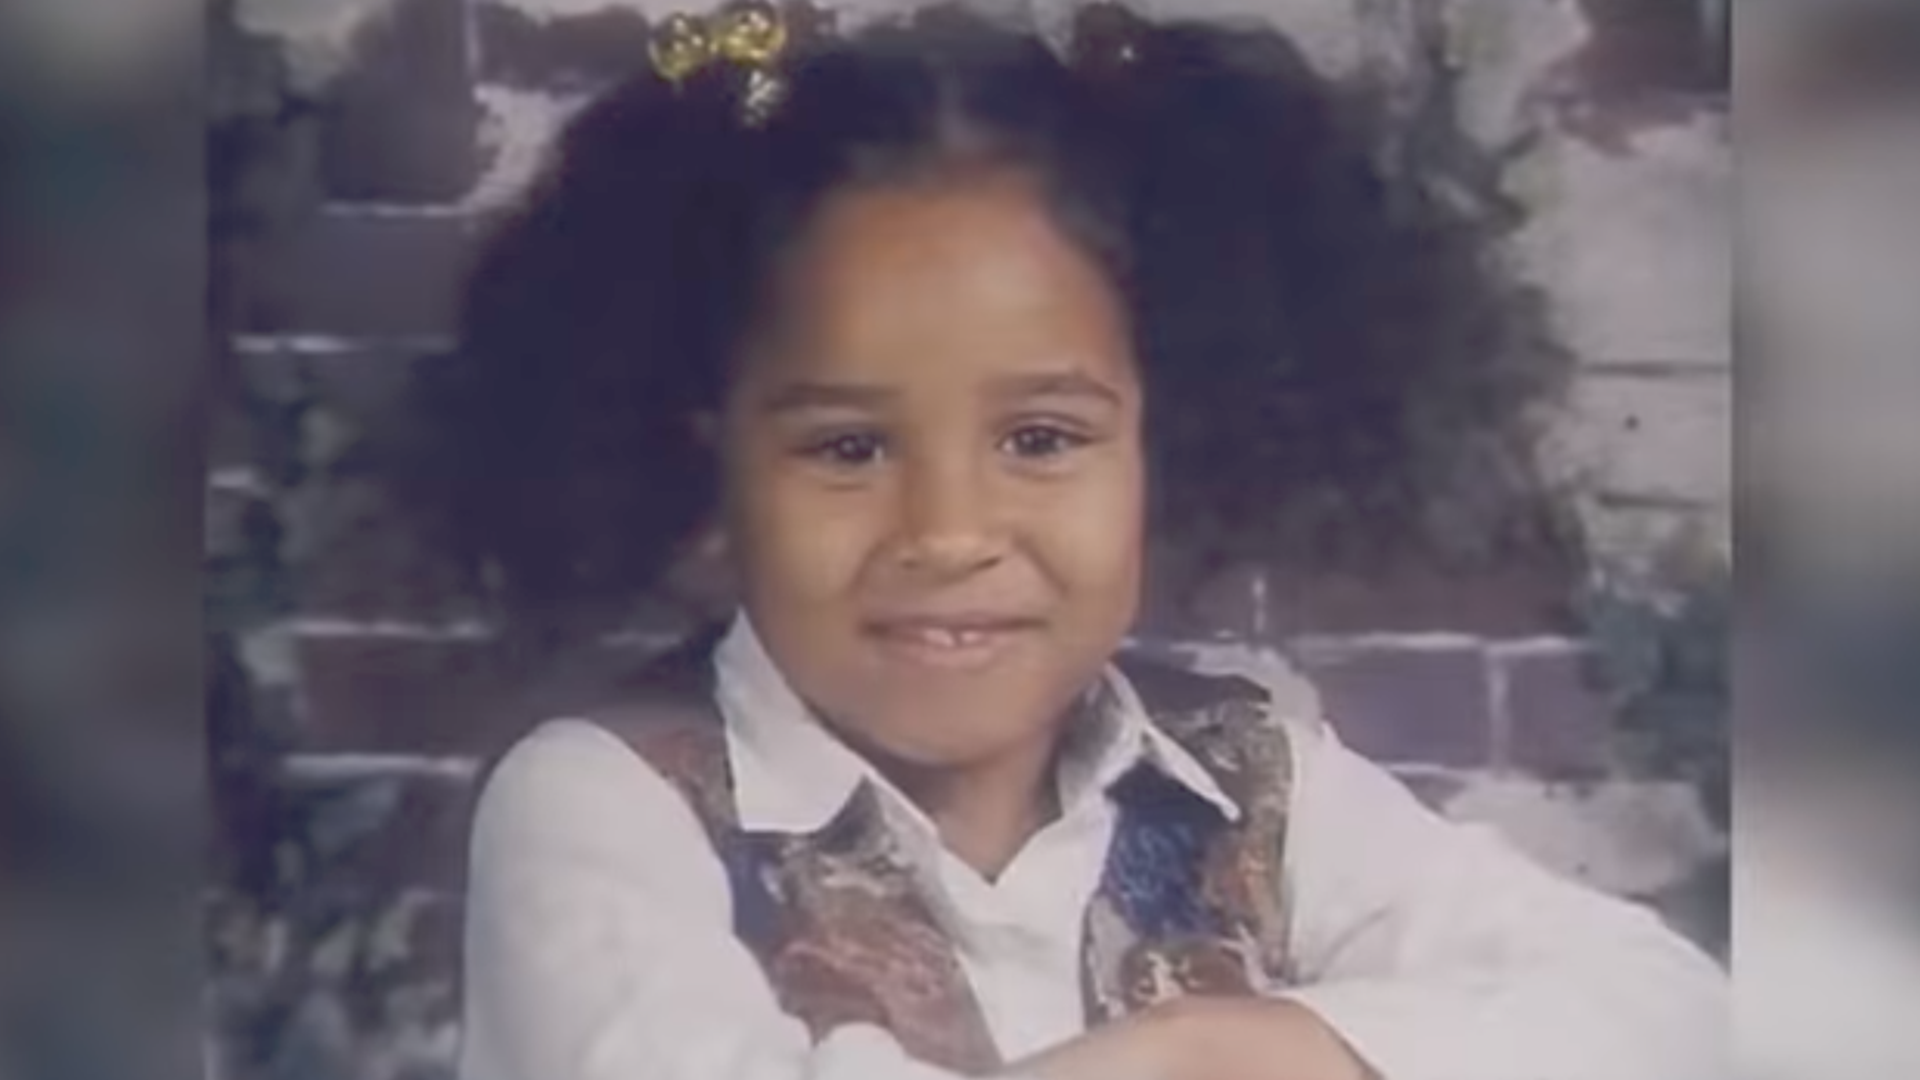 "I love you" were the last words Danyell Martin heard her 7-year-old sister, Danydia Thomspon, say before she disappeared on her way to school in Killeen in April of 1997. Over two decades later, the family is still looking for justice in her murder.